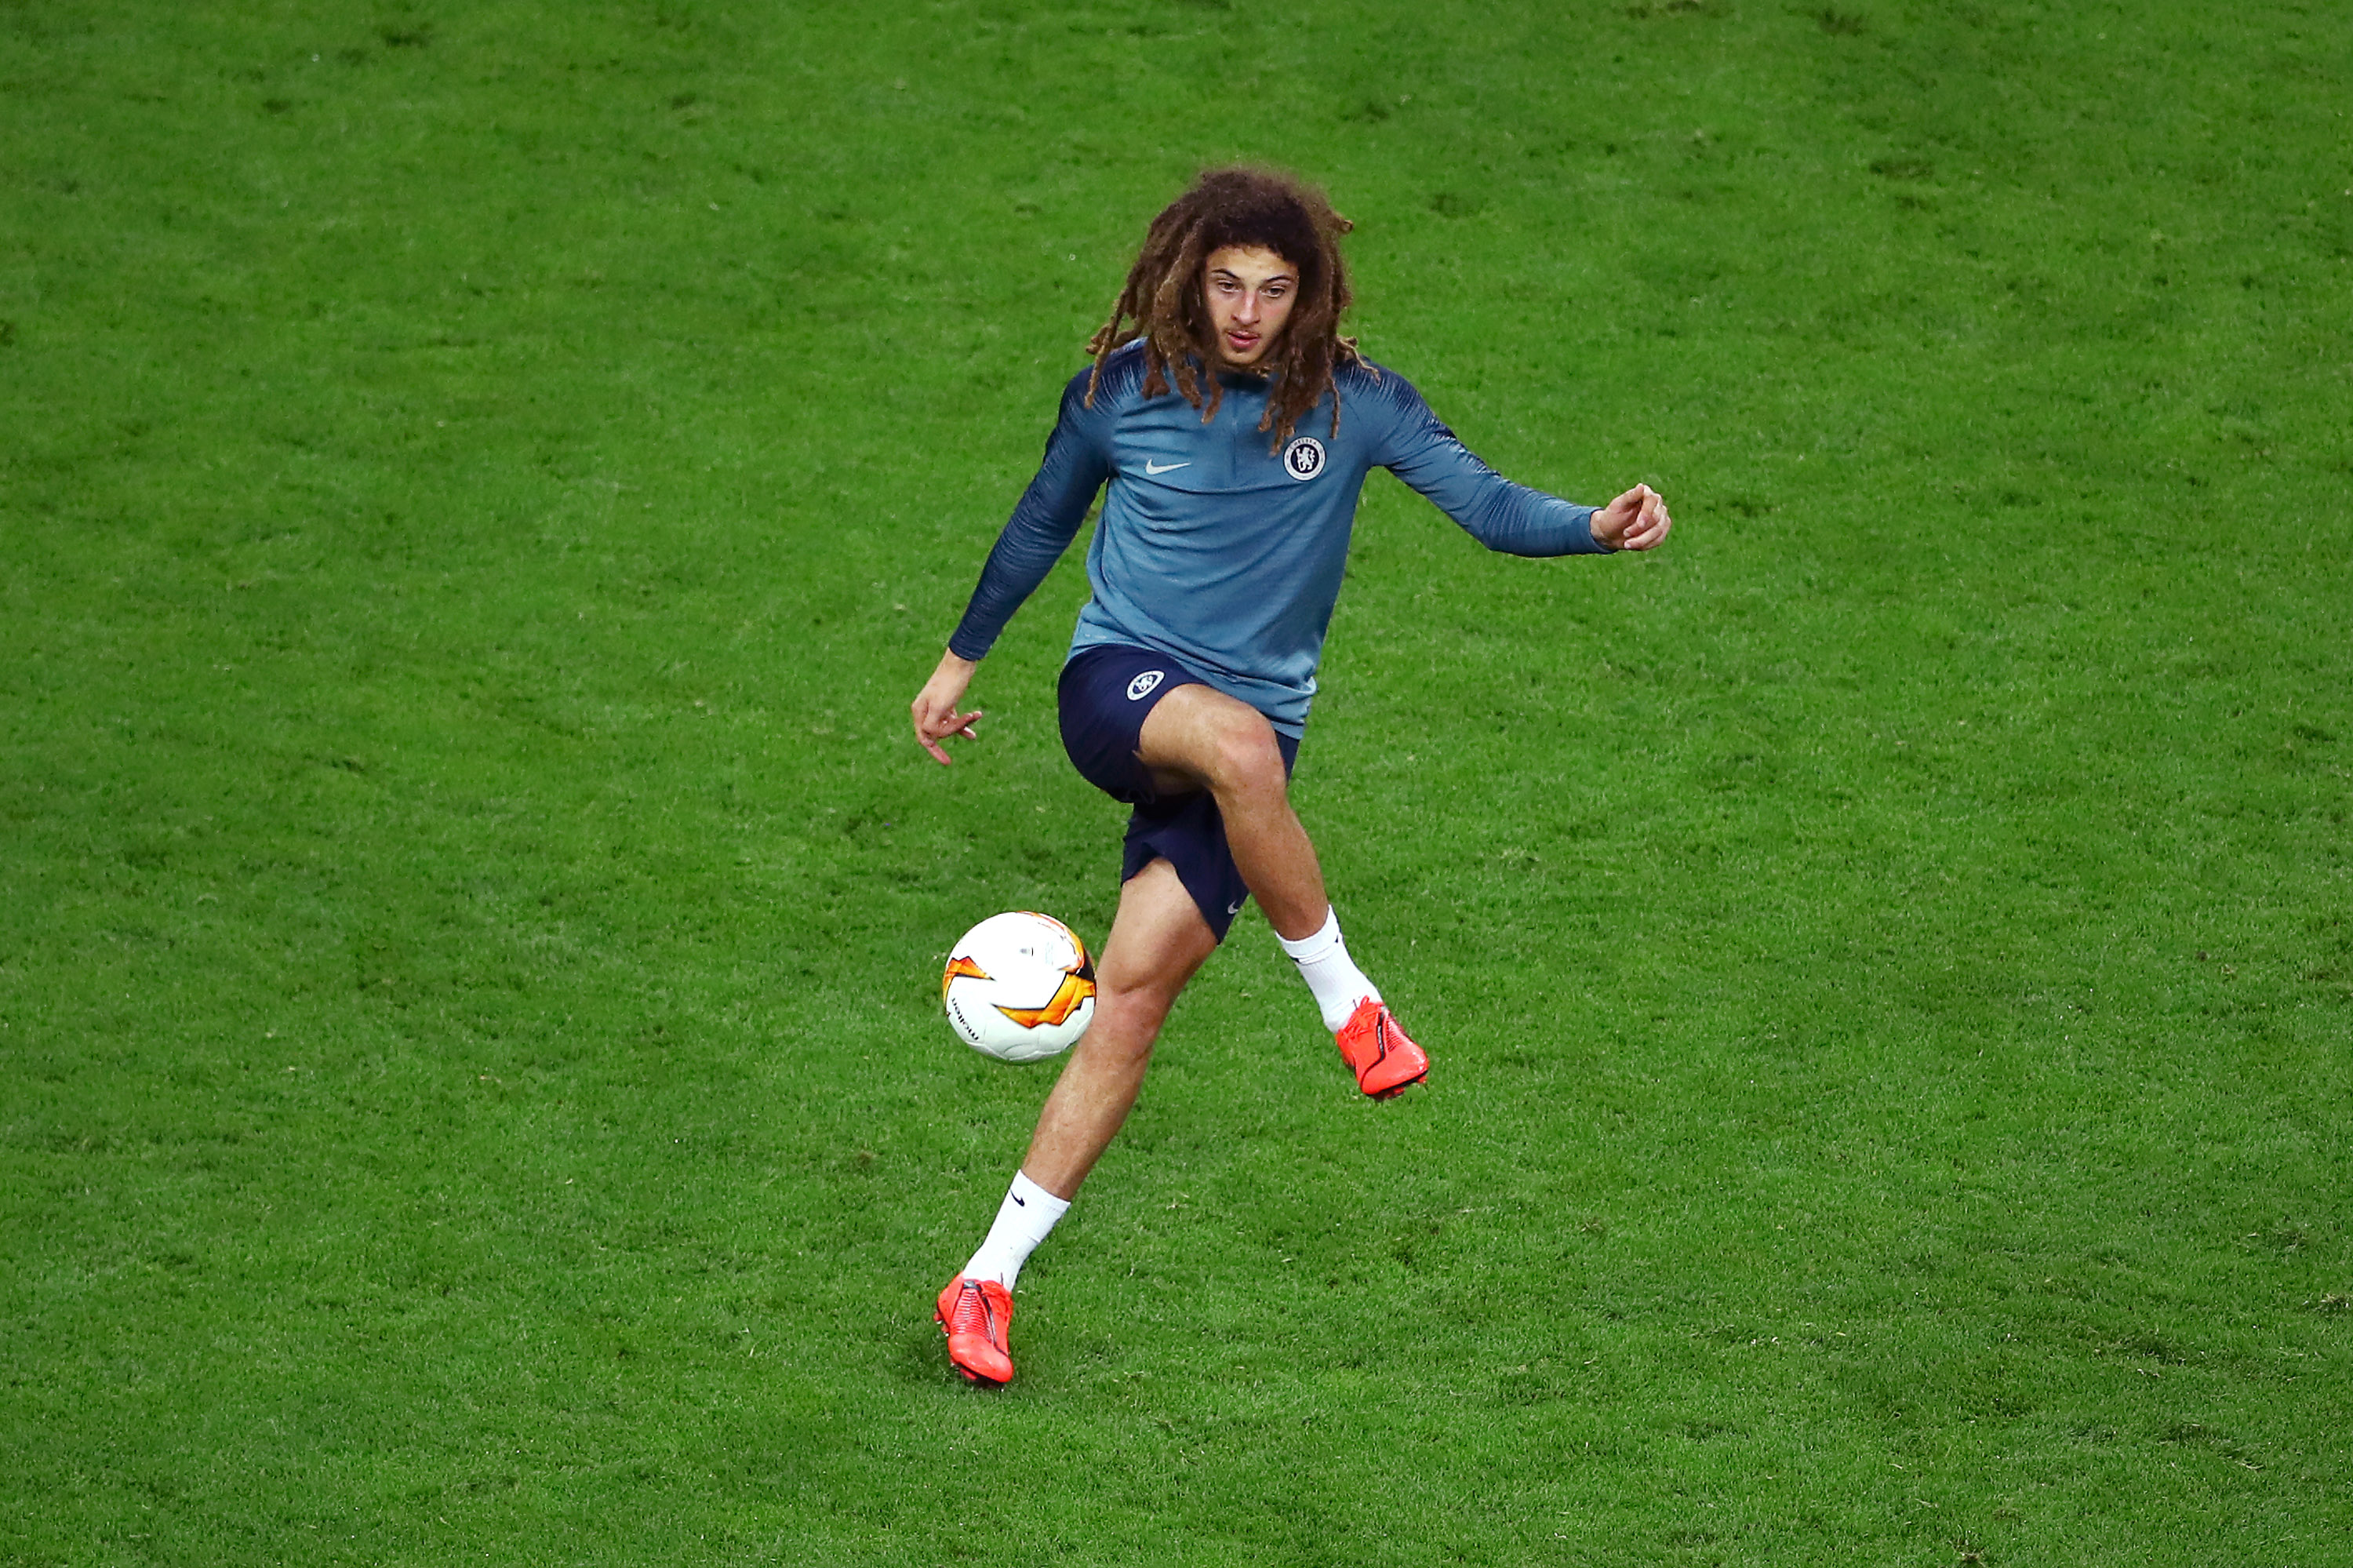 BAKU, AZERBAIJAN - MAY 28: Ethan Ampadu of Chelsea trains during the Chelsea FC training session on the eve of the UEFA Europa League Final against Arsenal at Baku Olimpiya Stadion on May 28, 2019 in Baku, Azerbaijan. (Photo by Francois Nel/Getty Images)